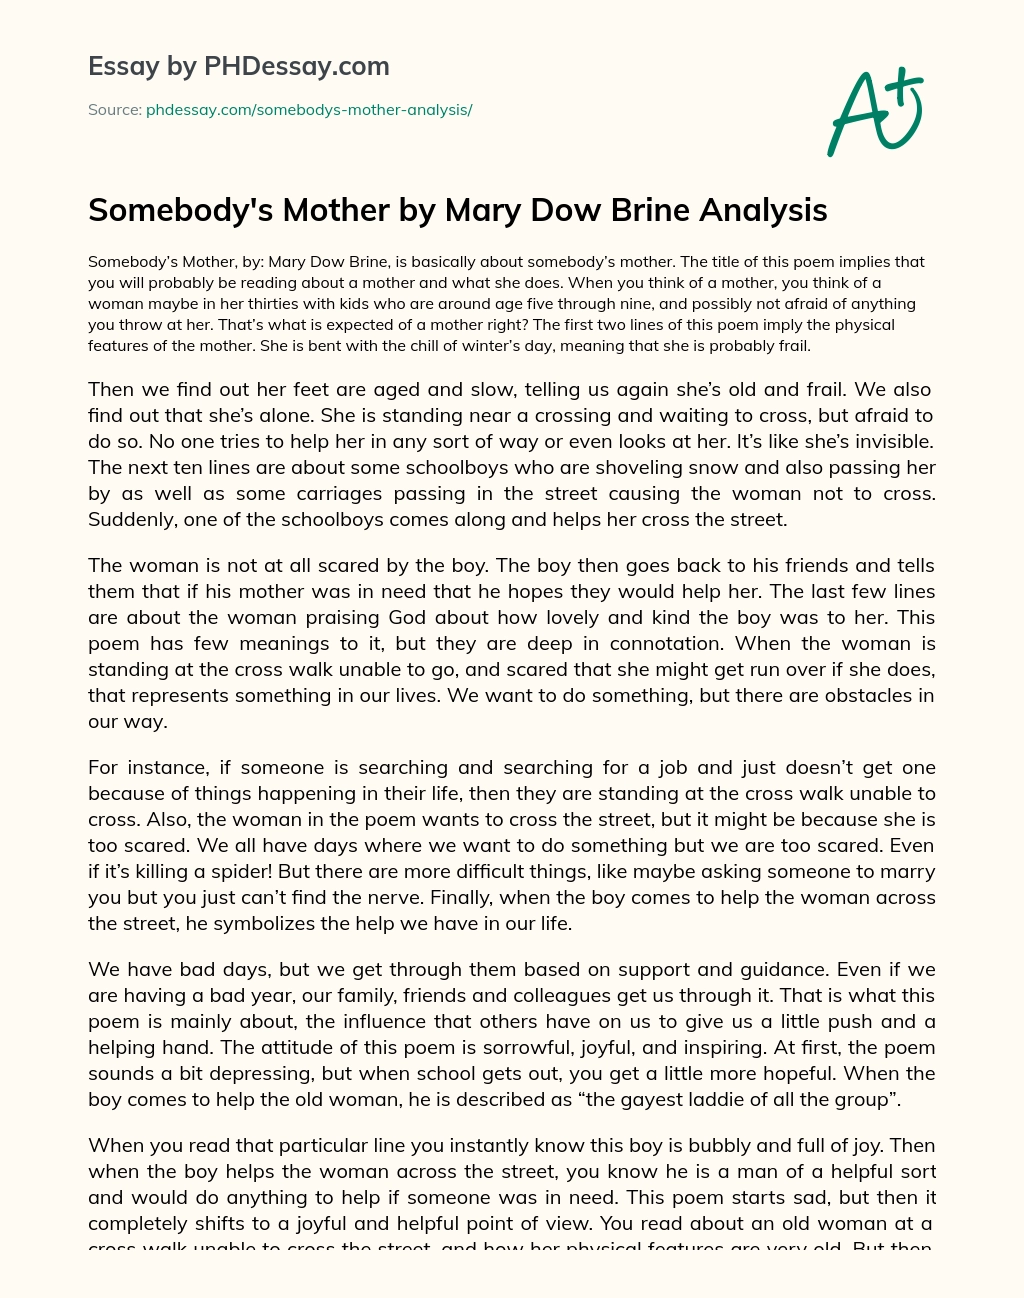 Somebody’s Mother by Mary Dow Brine Analysis essay